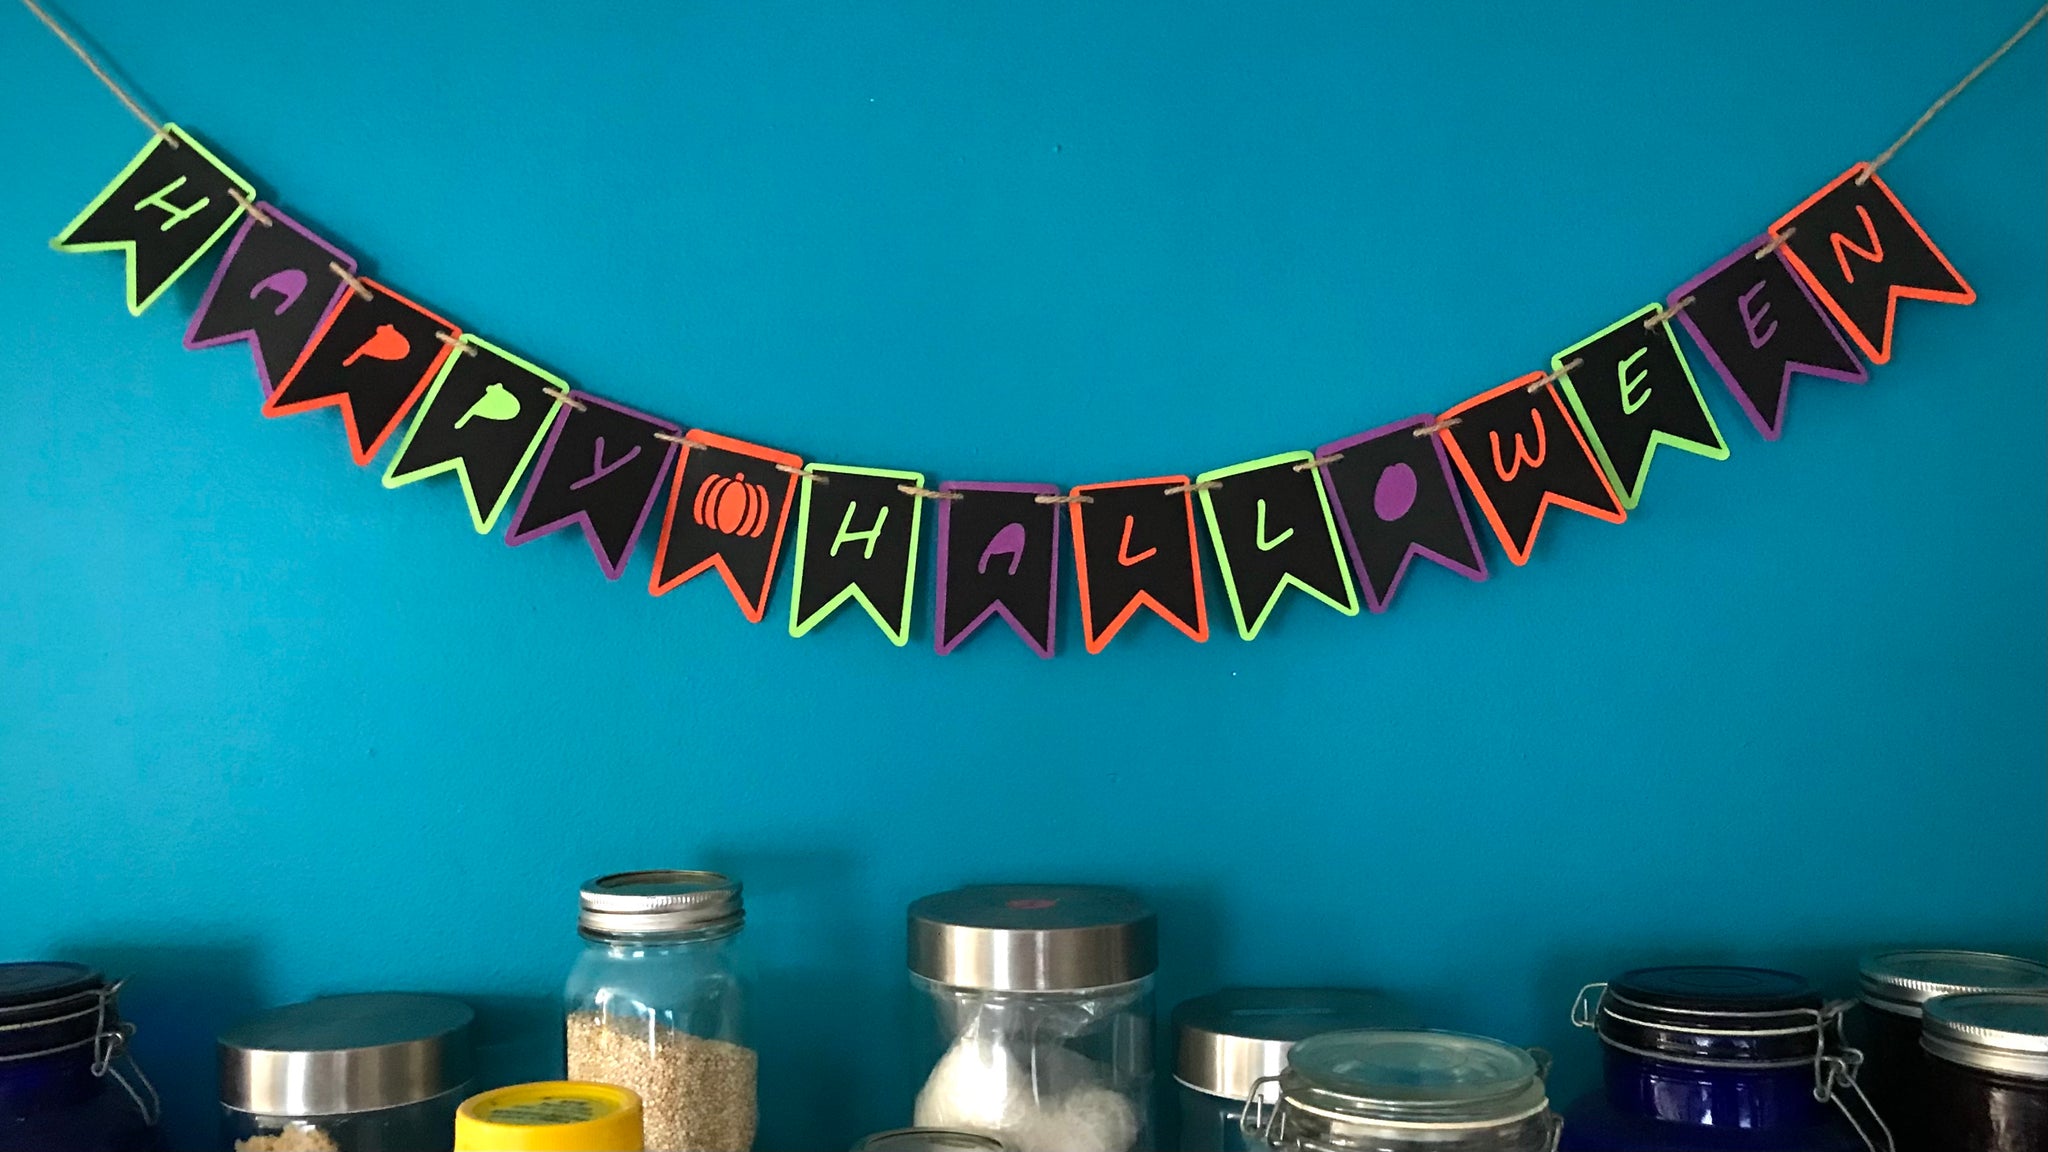 A paper banner reading Happy Halloween Is hung against a blue background over a collection of dry good storage jars.  The banner is made from two layers of paper, a top black layer with the letters cut out to show the bottom layer of green, purple and orange paper.  The banner is hung on hemp cord